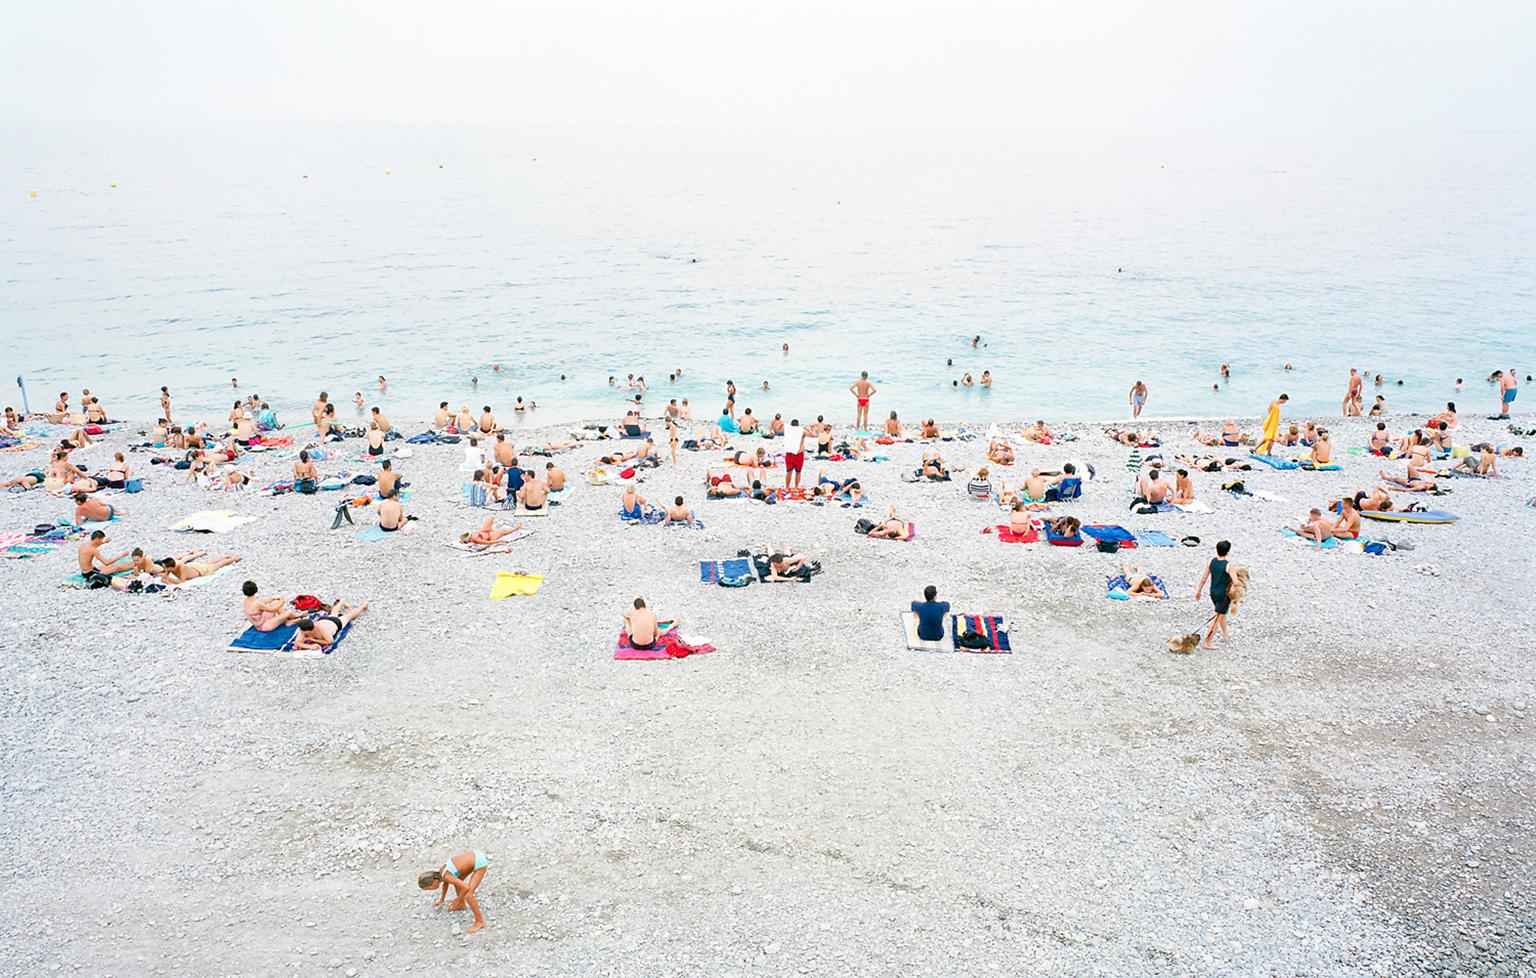 Frank Schott Landscape Photograph - Nizza - large format photograph of summer beach scene in South of France